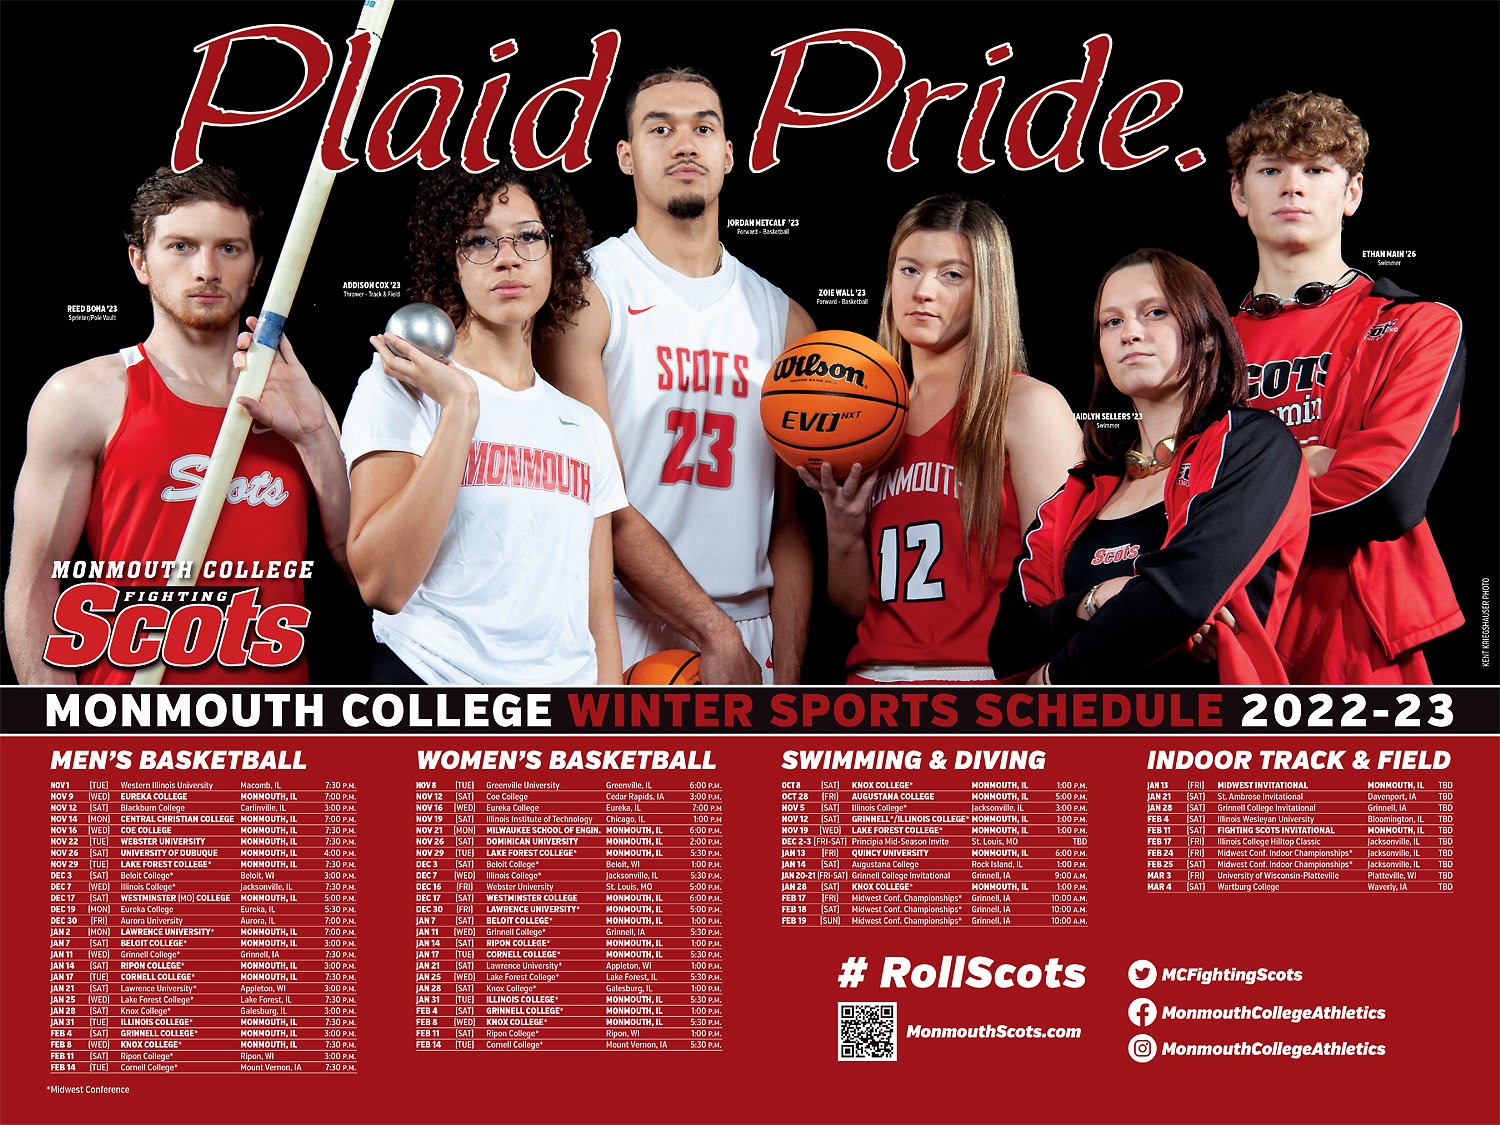  “Monmouth College Athletics” Monmouth, IL 